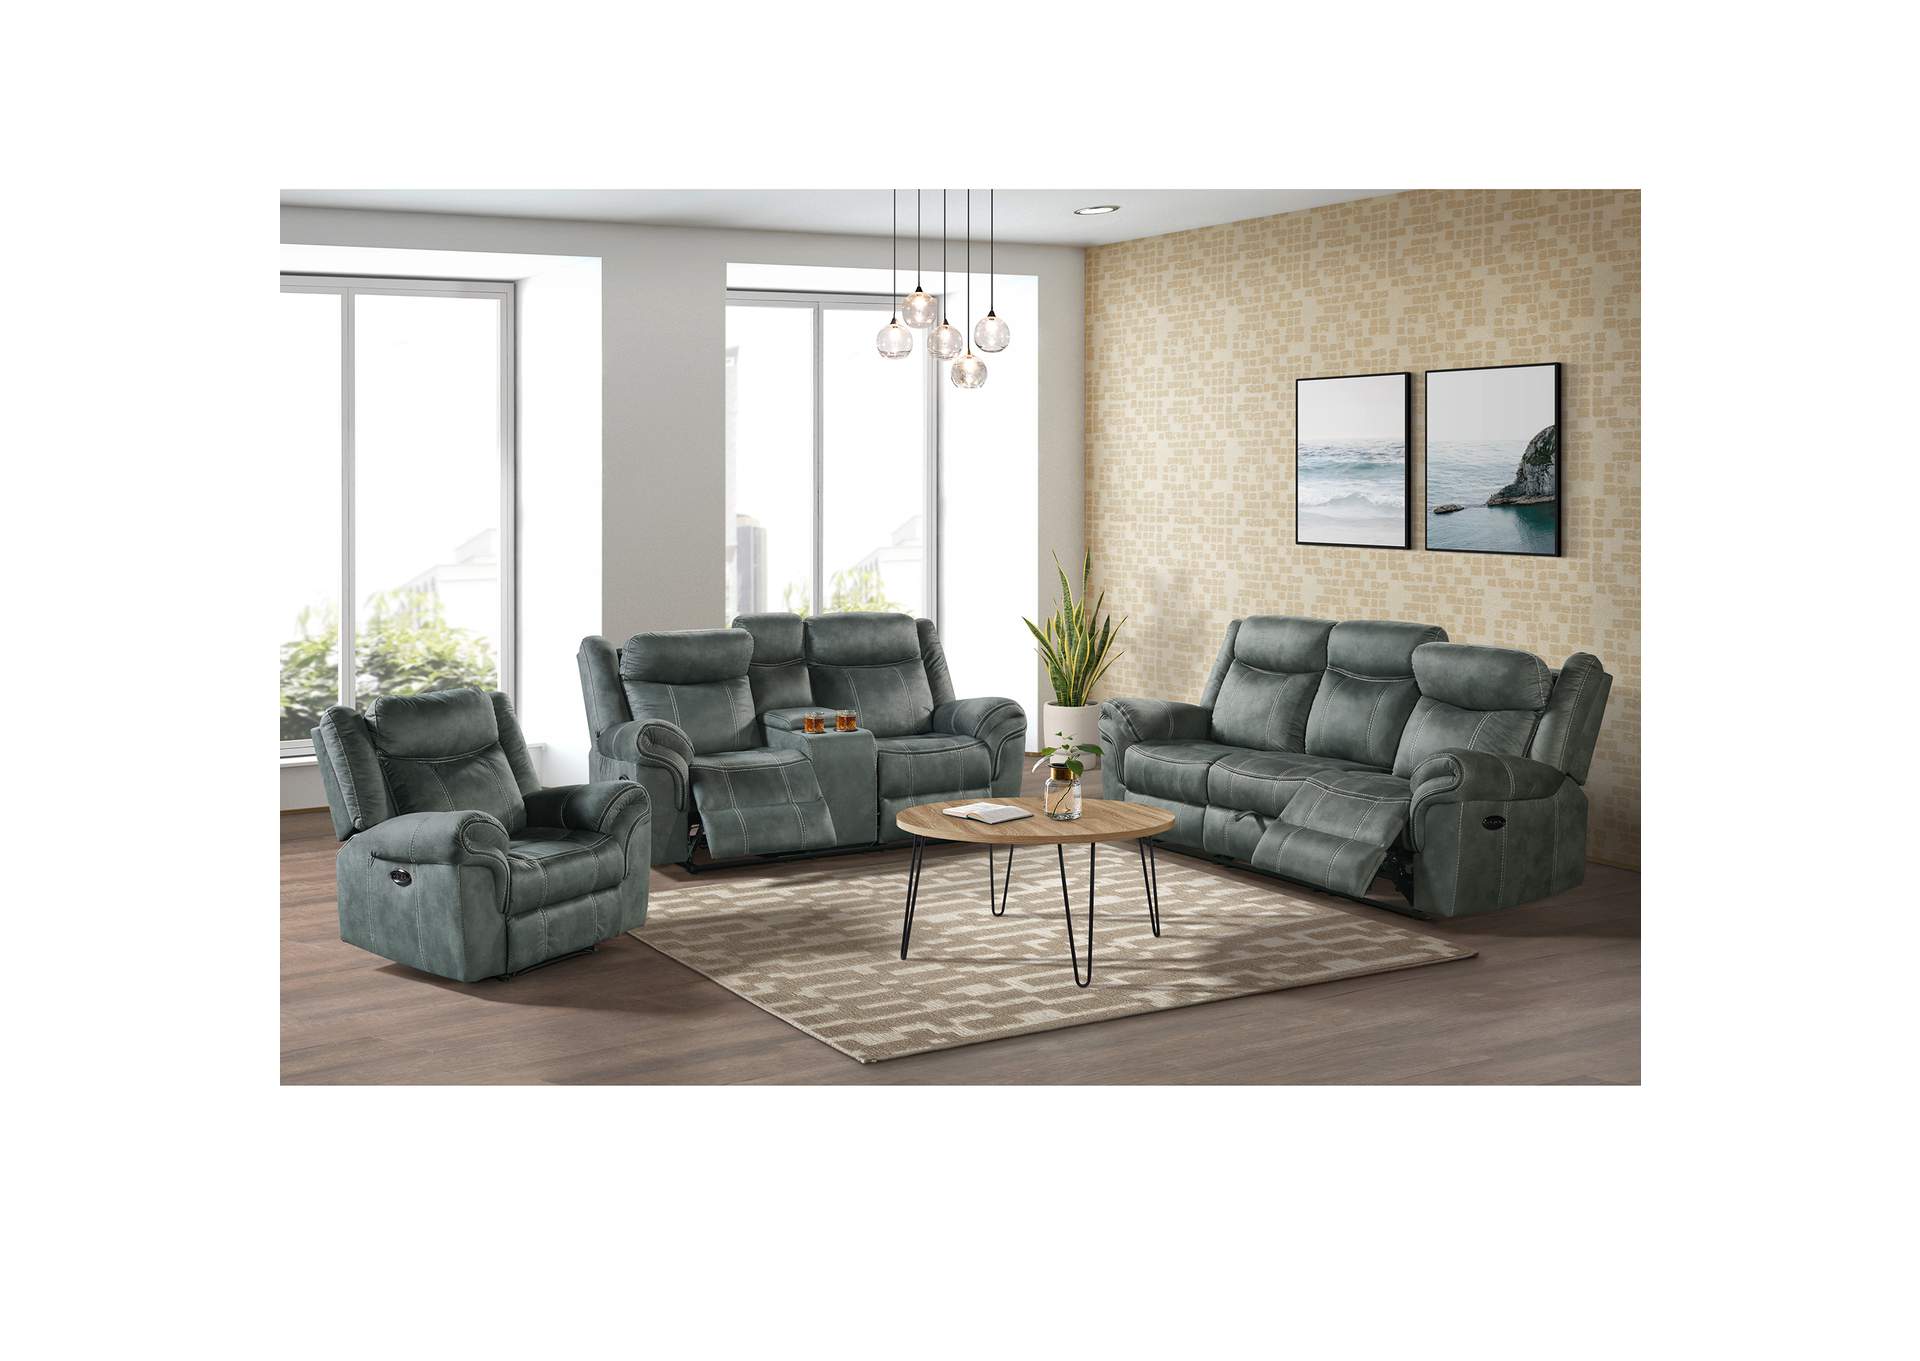 Sorrento Power Motion Loveseat With Console In Fb367 Charcoal,Elements